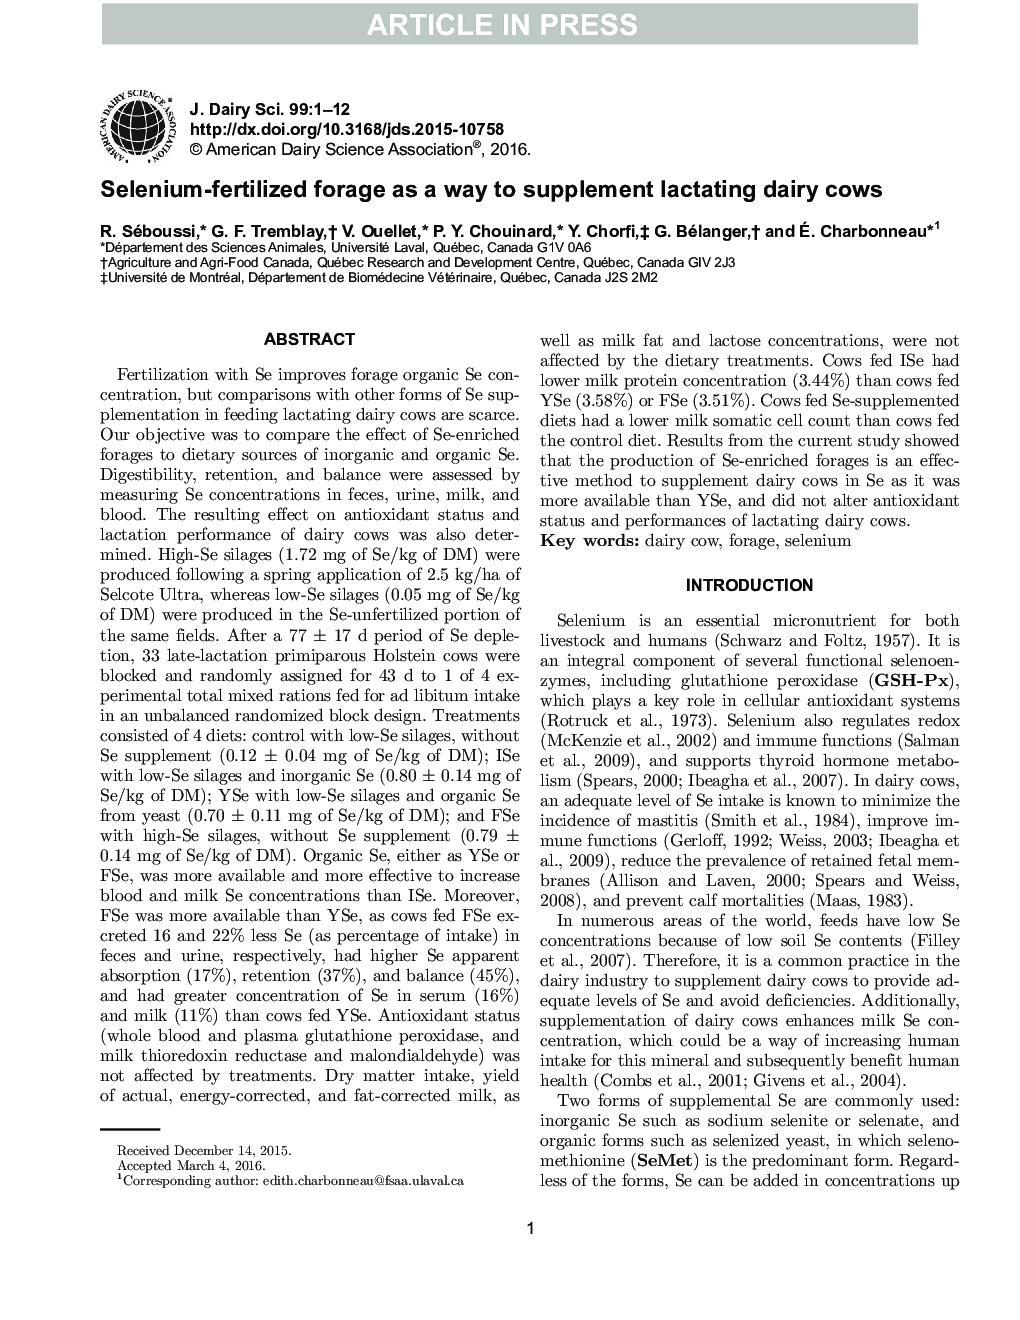 Selenium-fertilized forage as a way to supplement lactating dairy cows